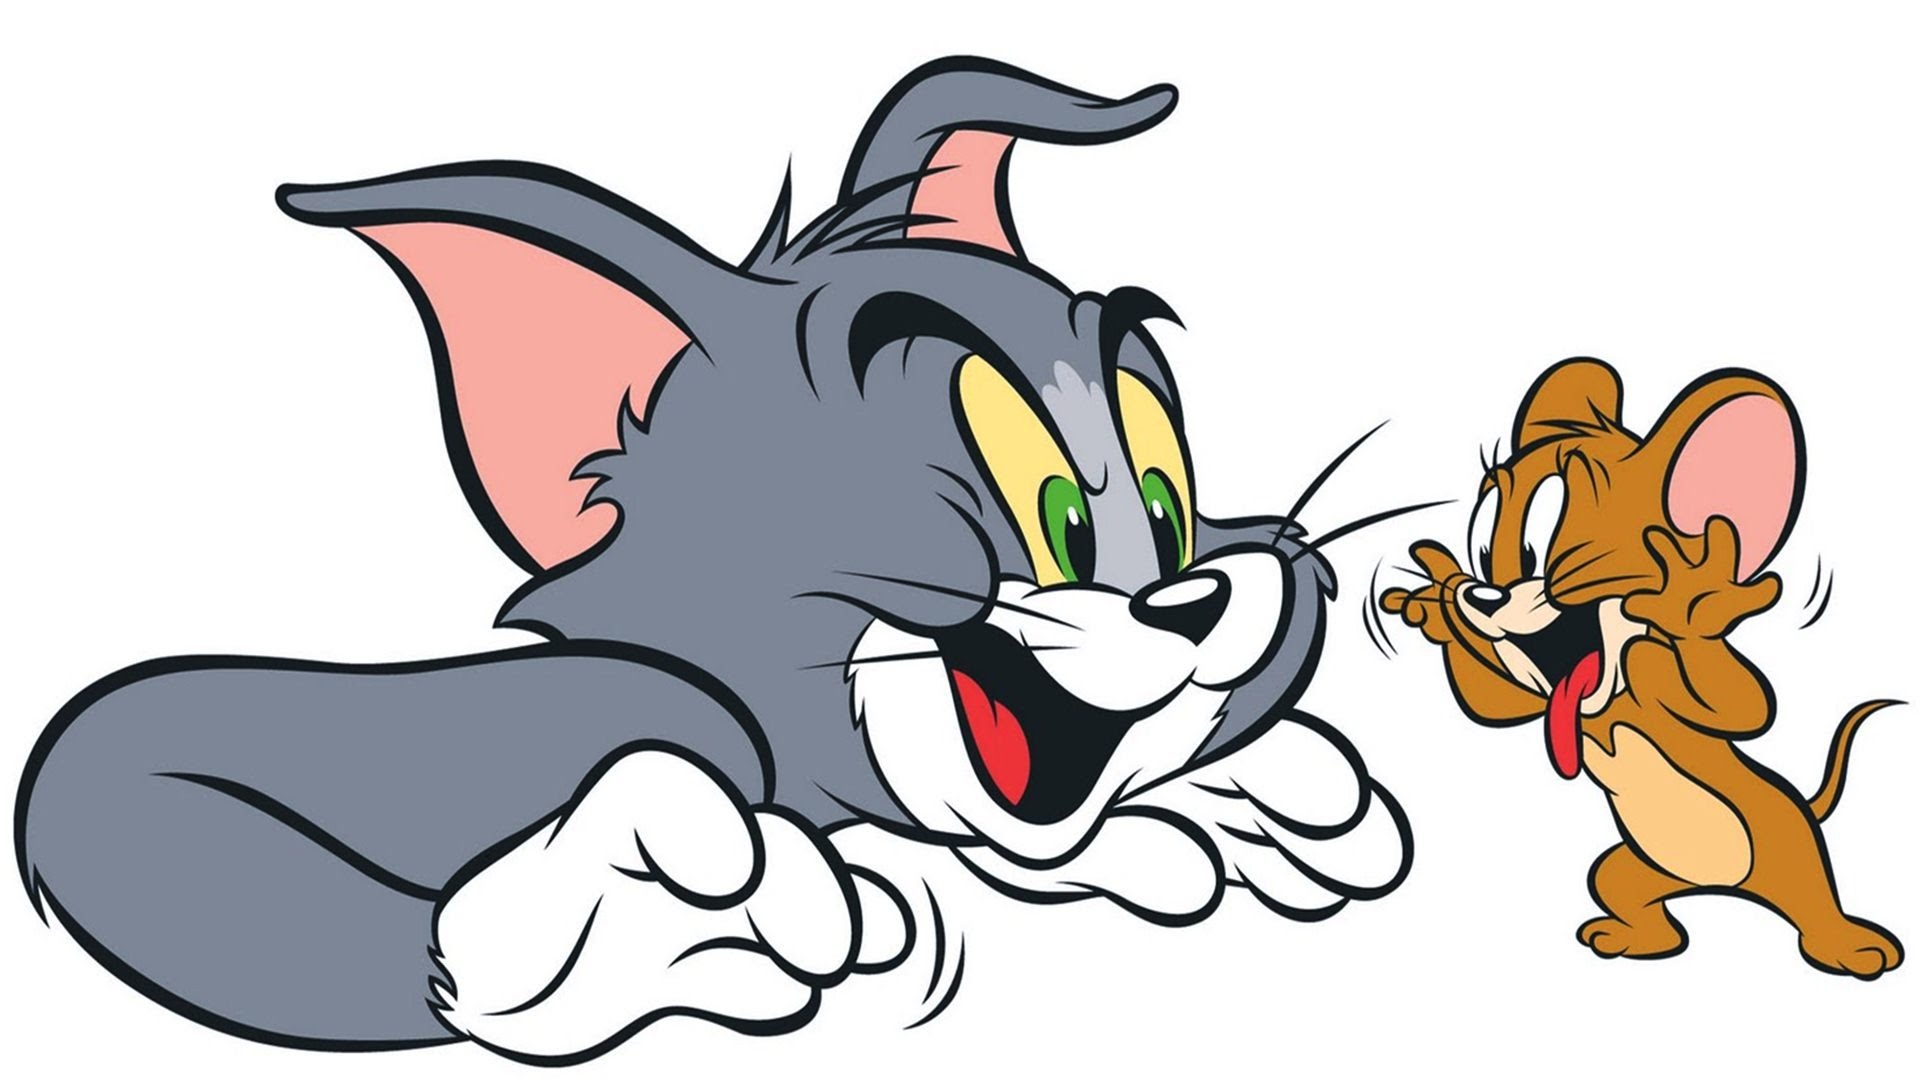 Tom and Jerry, Cartoon wallpapers, HQ pictures, 2019, 1920x1080 Full HD Desktop